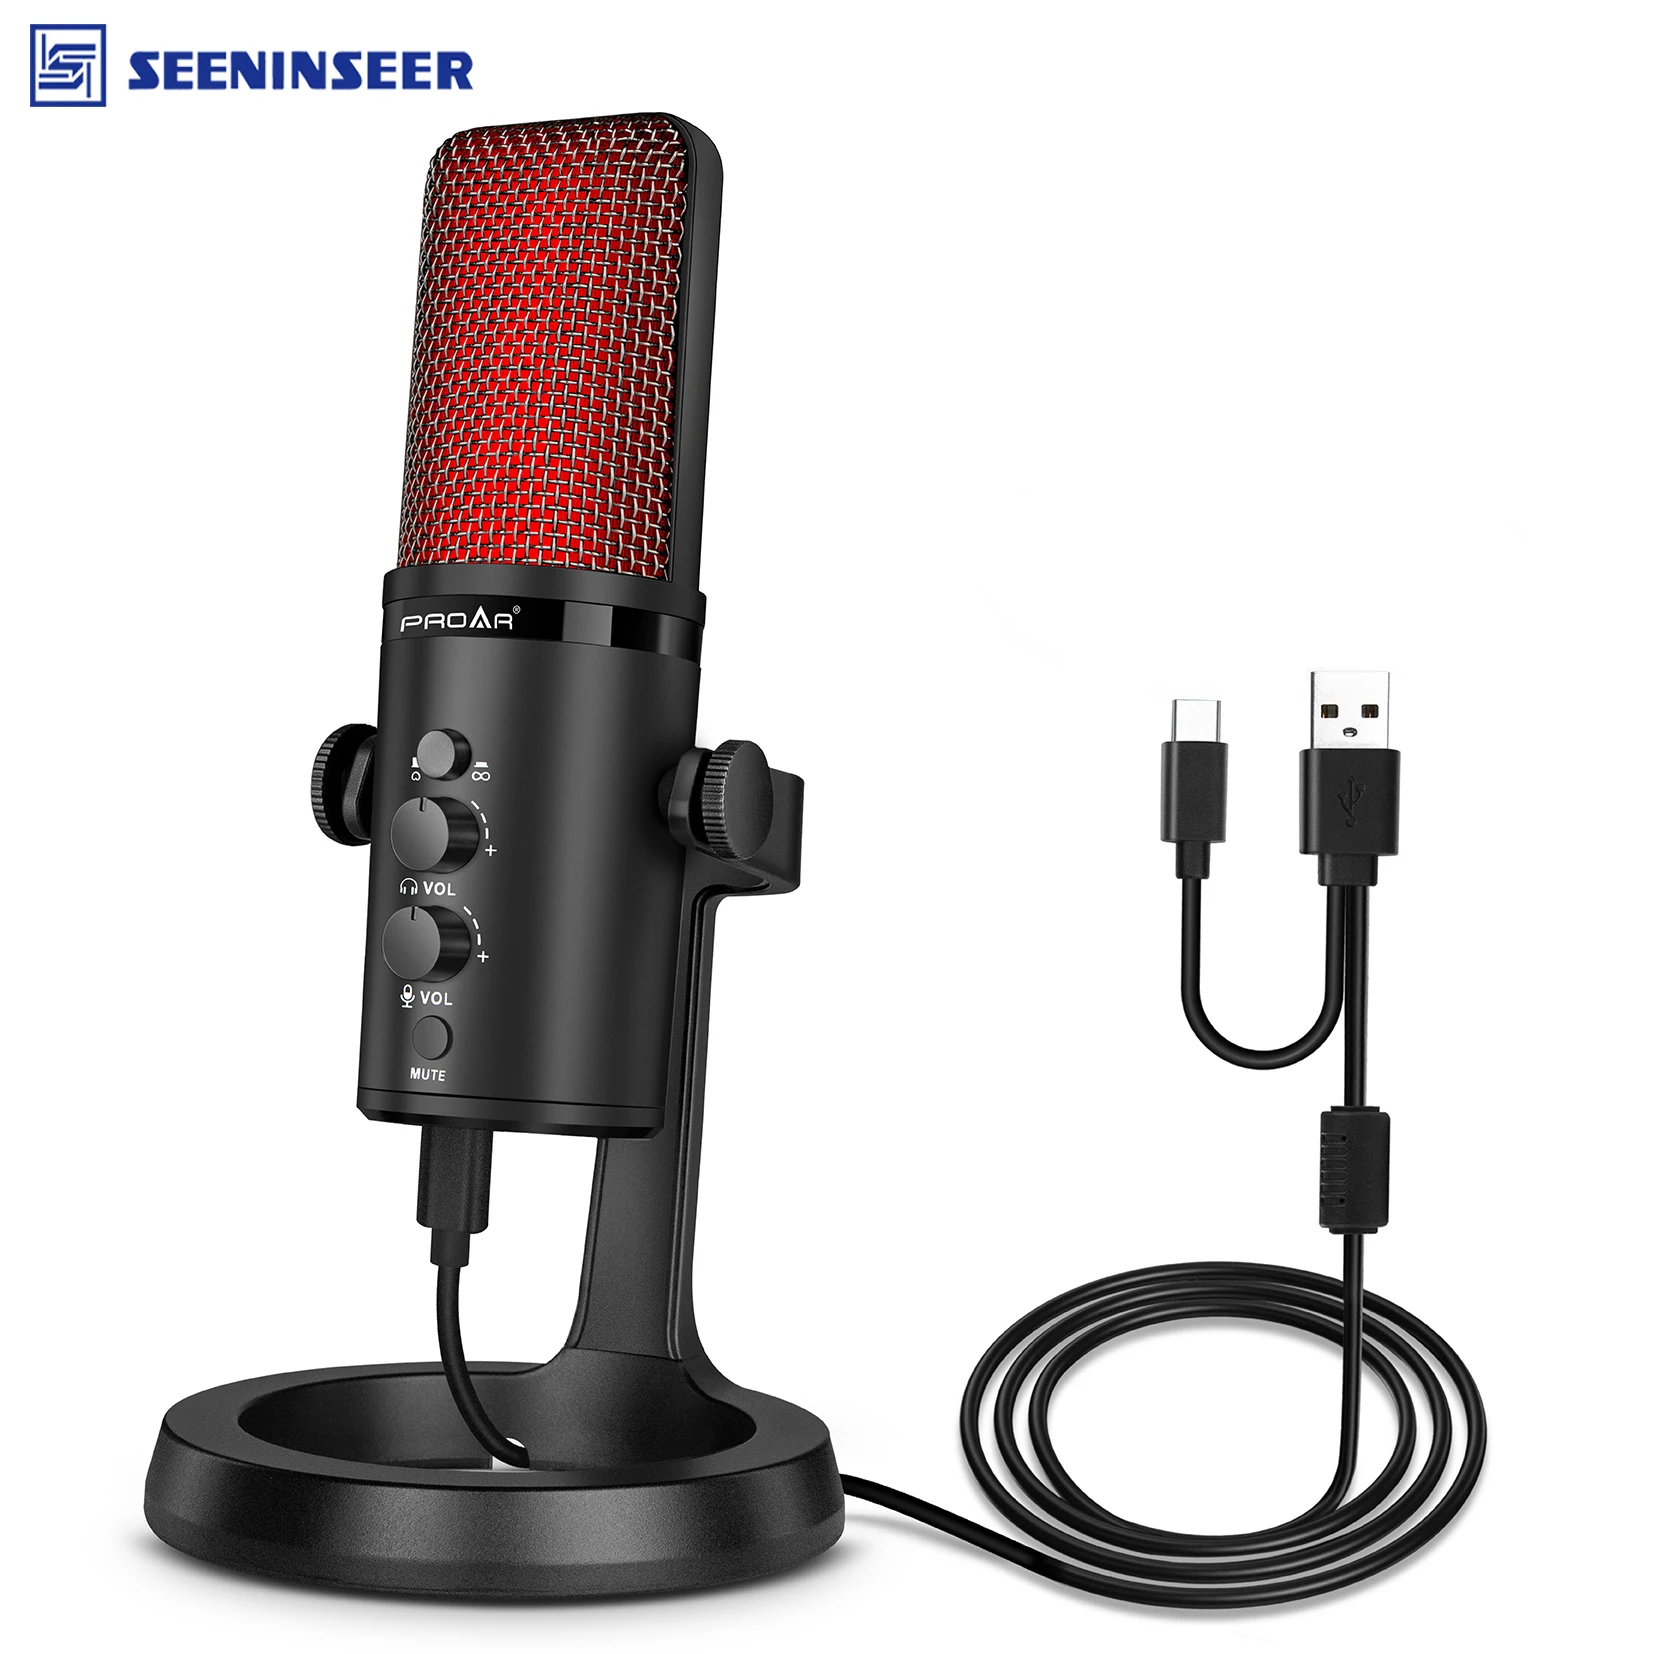 Streaming Podcast Microphone | Podcast Recording Microphone | Stream Podcasts - Usb - Aliexpress